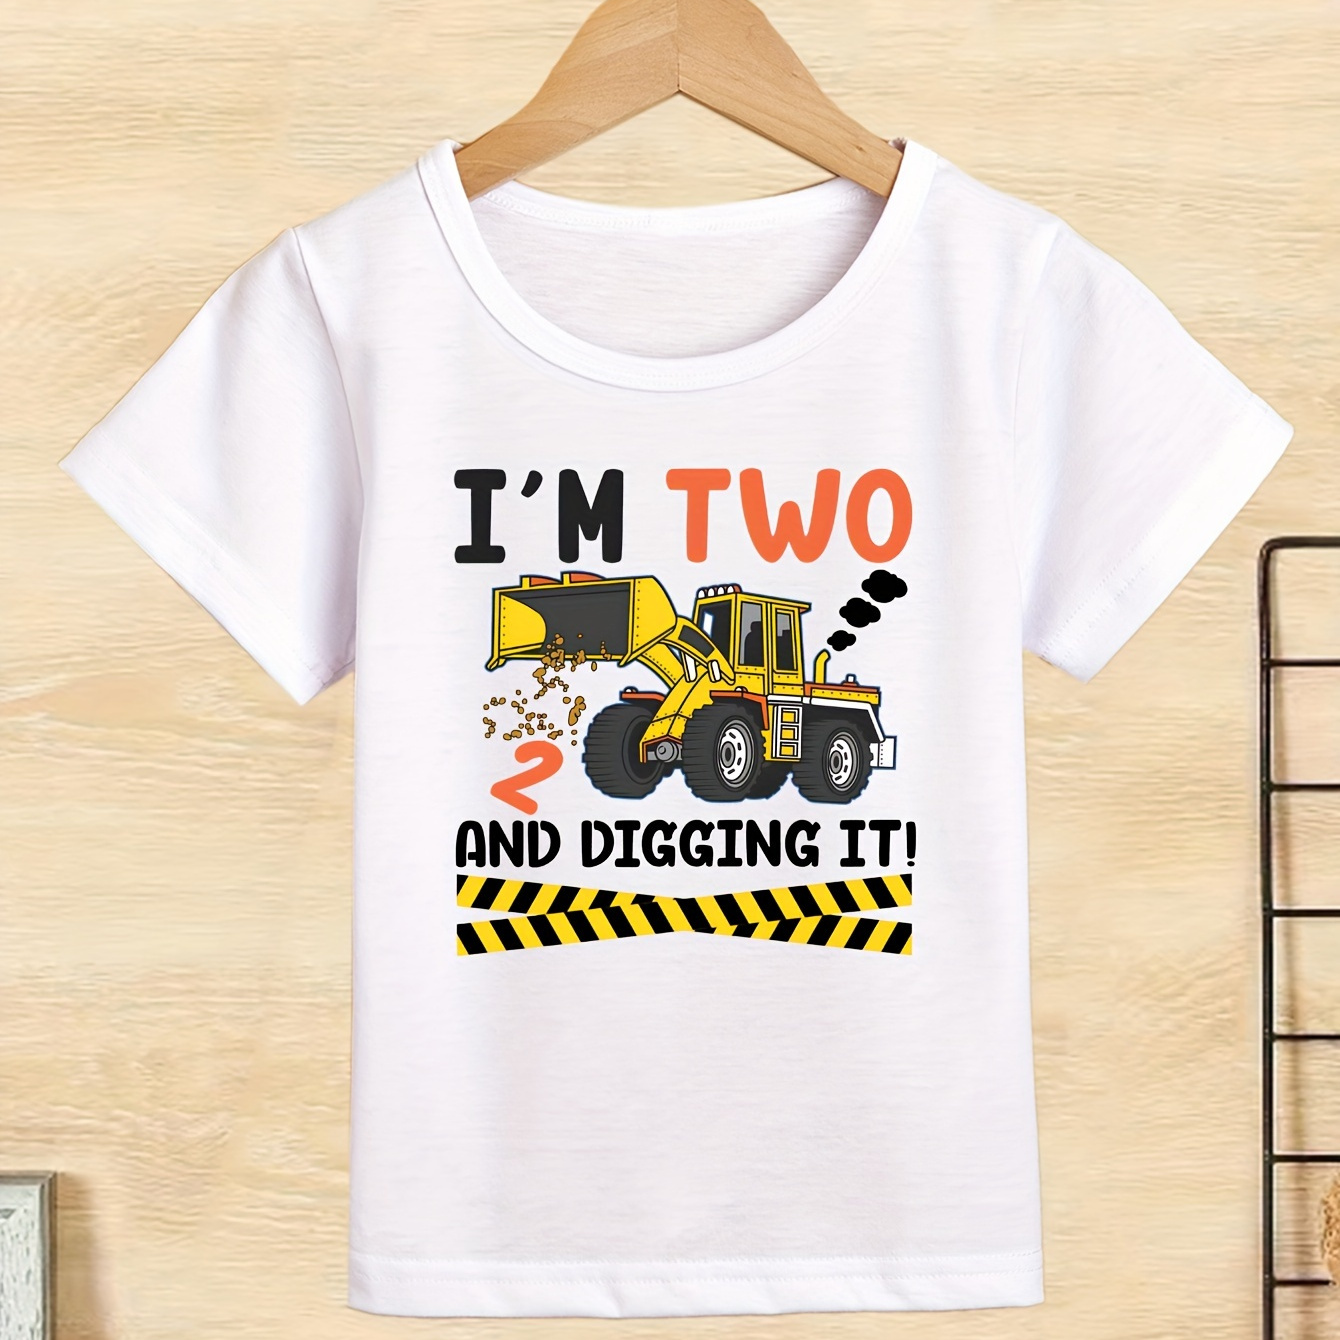 

I Am 2 And Digging It Boy Print Boys Creative 2nd Birthday T-shirt, Casual Lightweight Comfy Short Sleeve Crew Neck Tee Tops, Kids Clothings For Summer